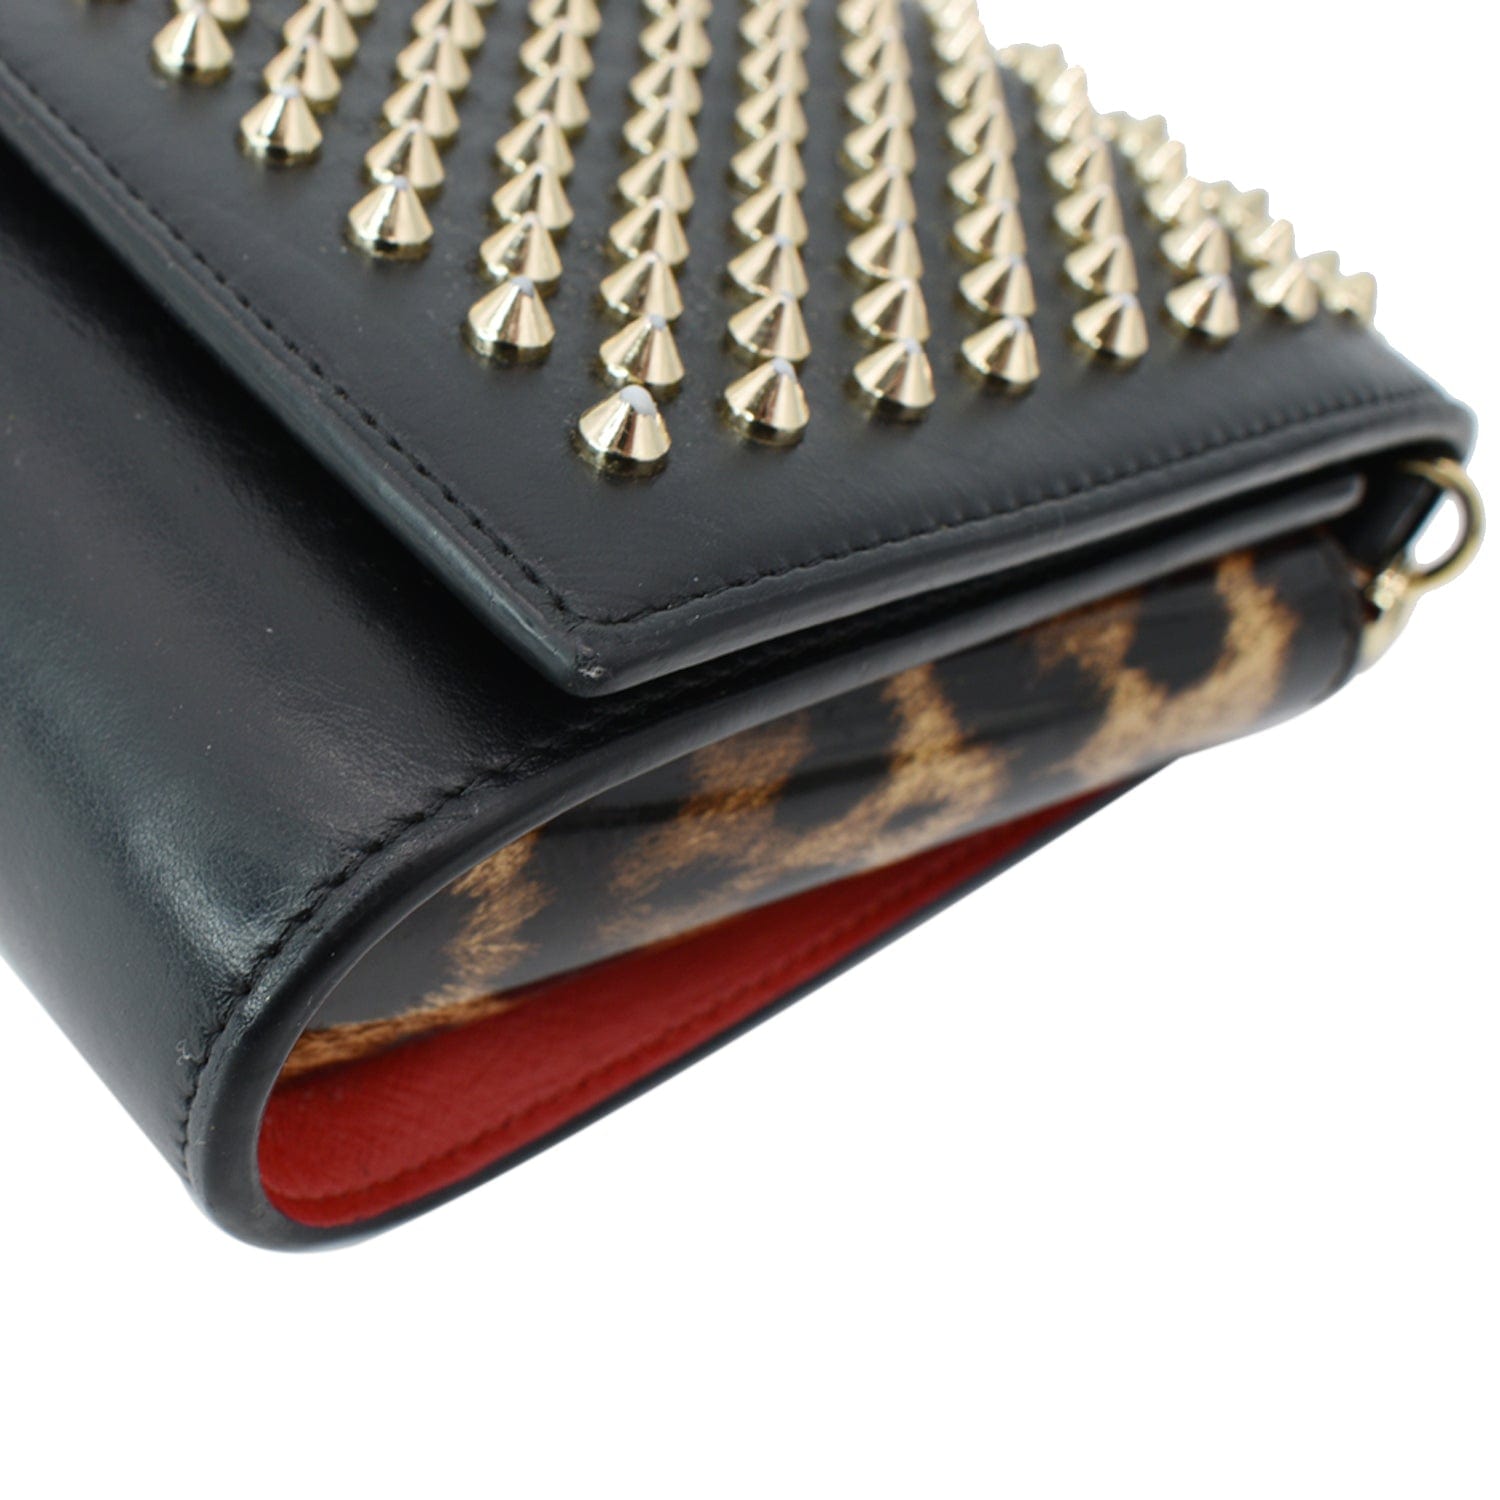 Paloma Clutch Embellished Leather Small